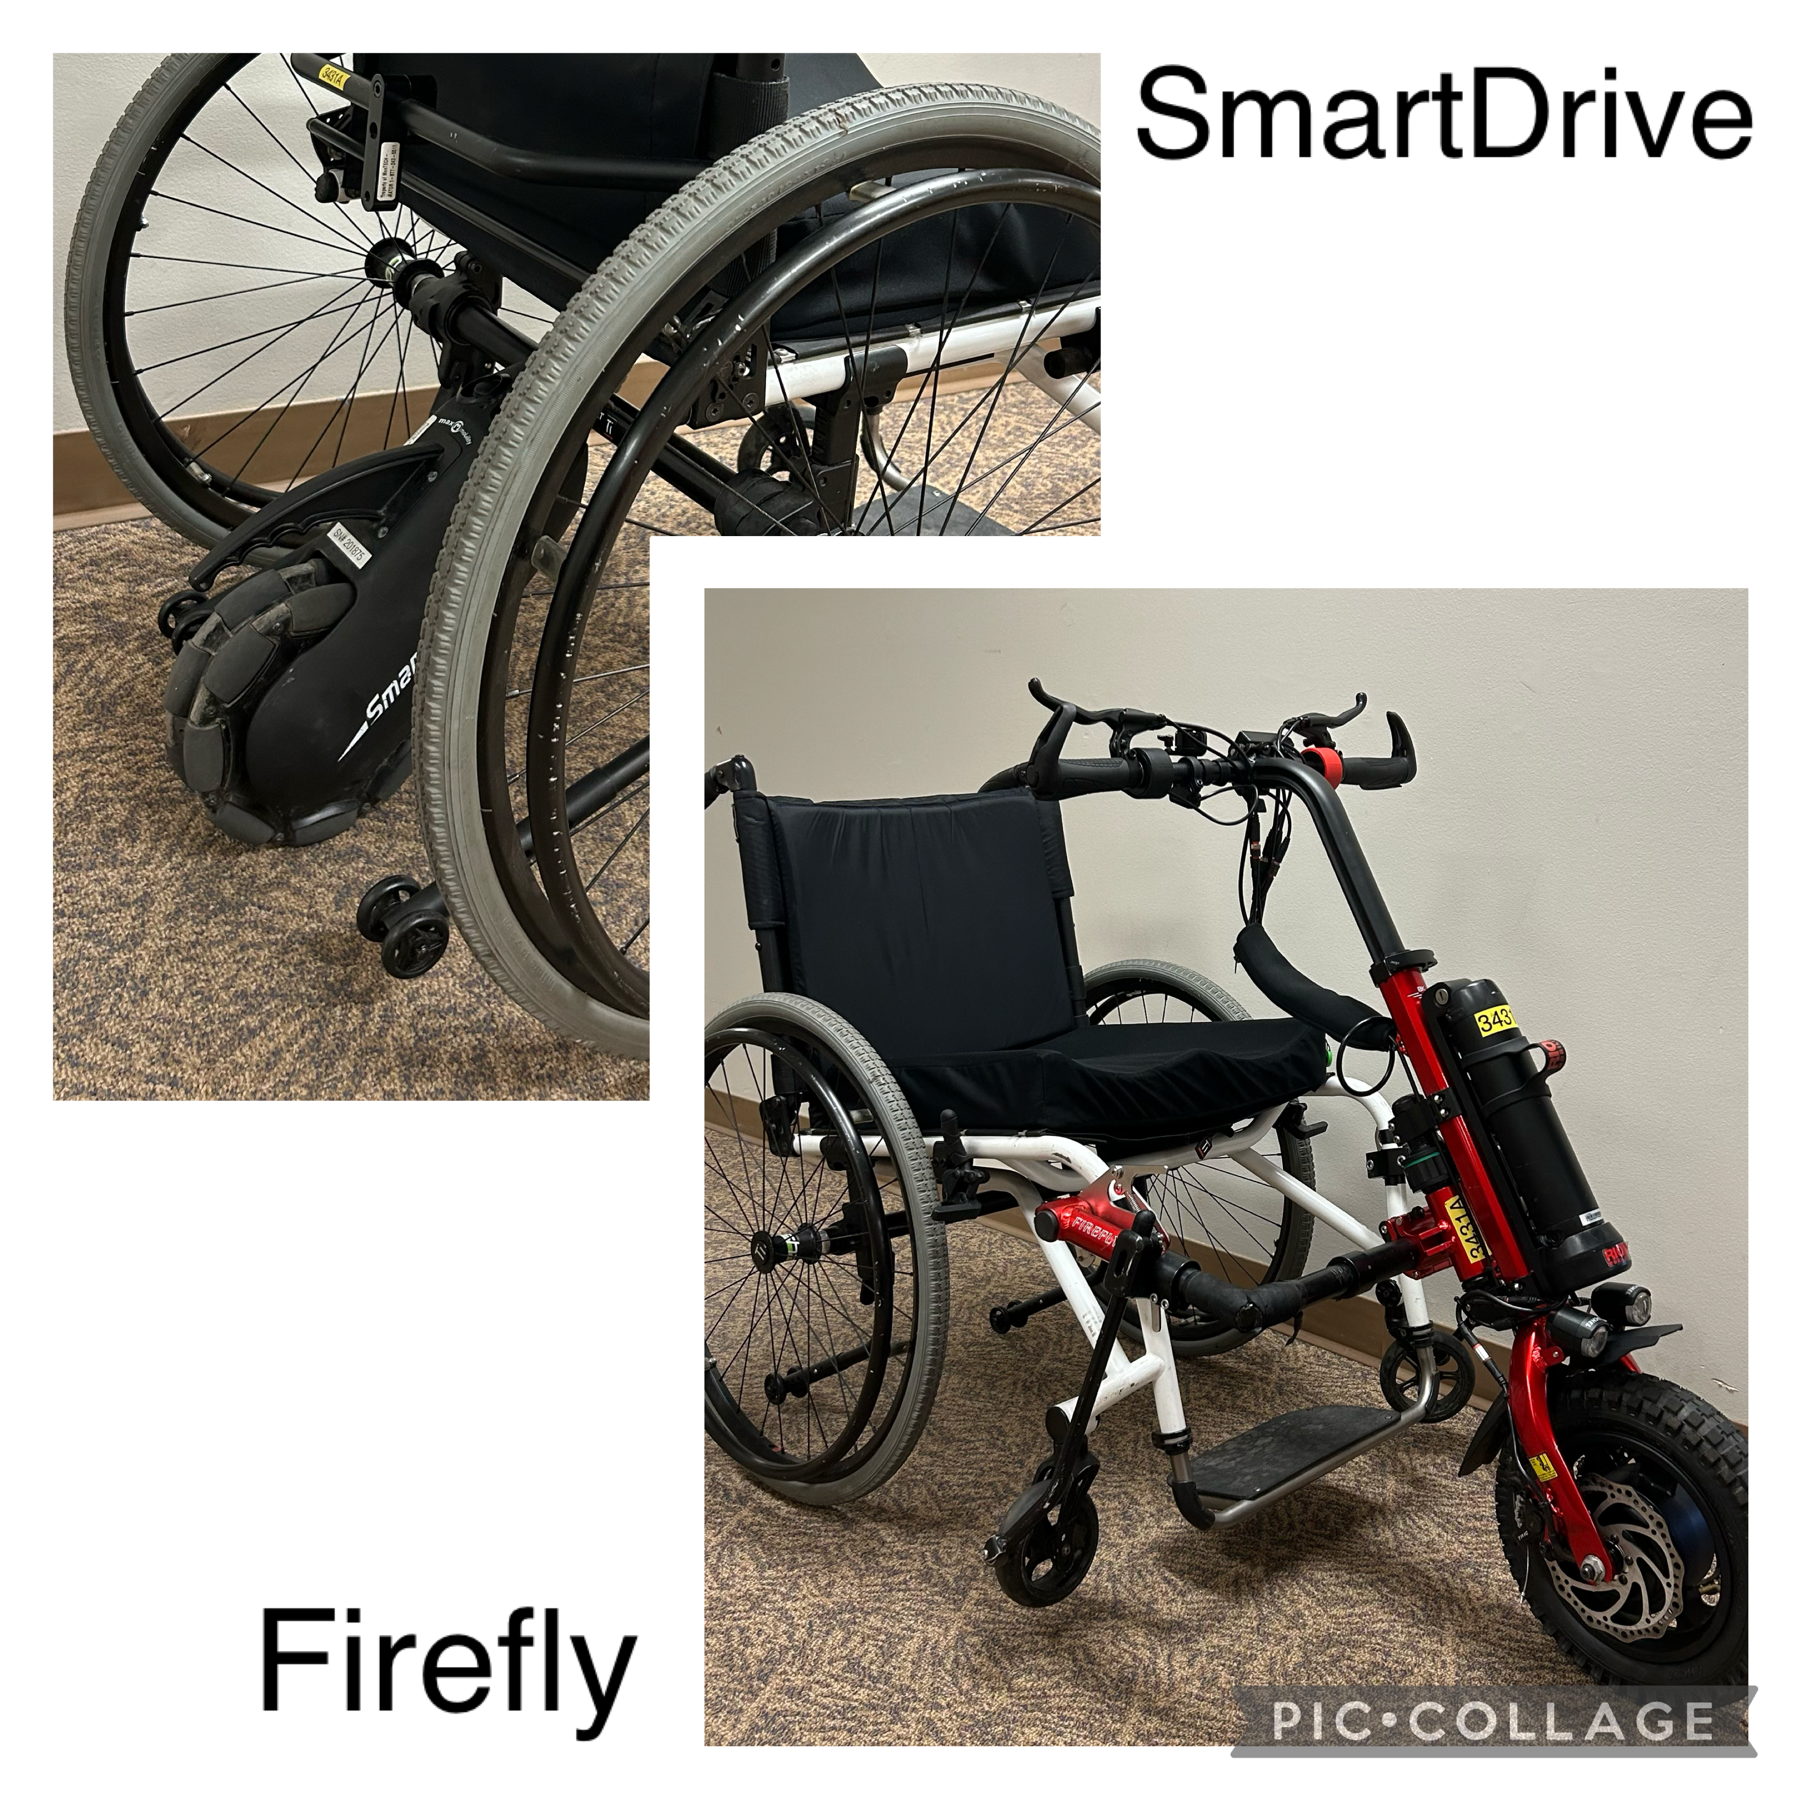 Thumbnail of SmartDrive MX2+ OR Rio Firefly attachment and wheelchair.